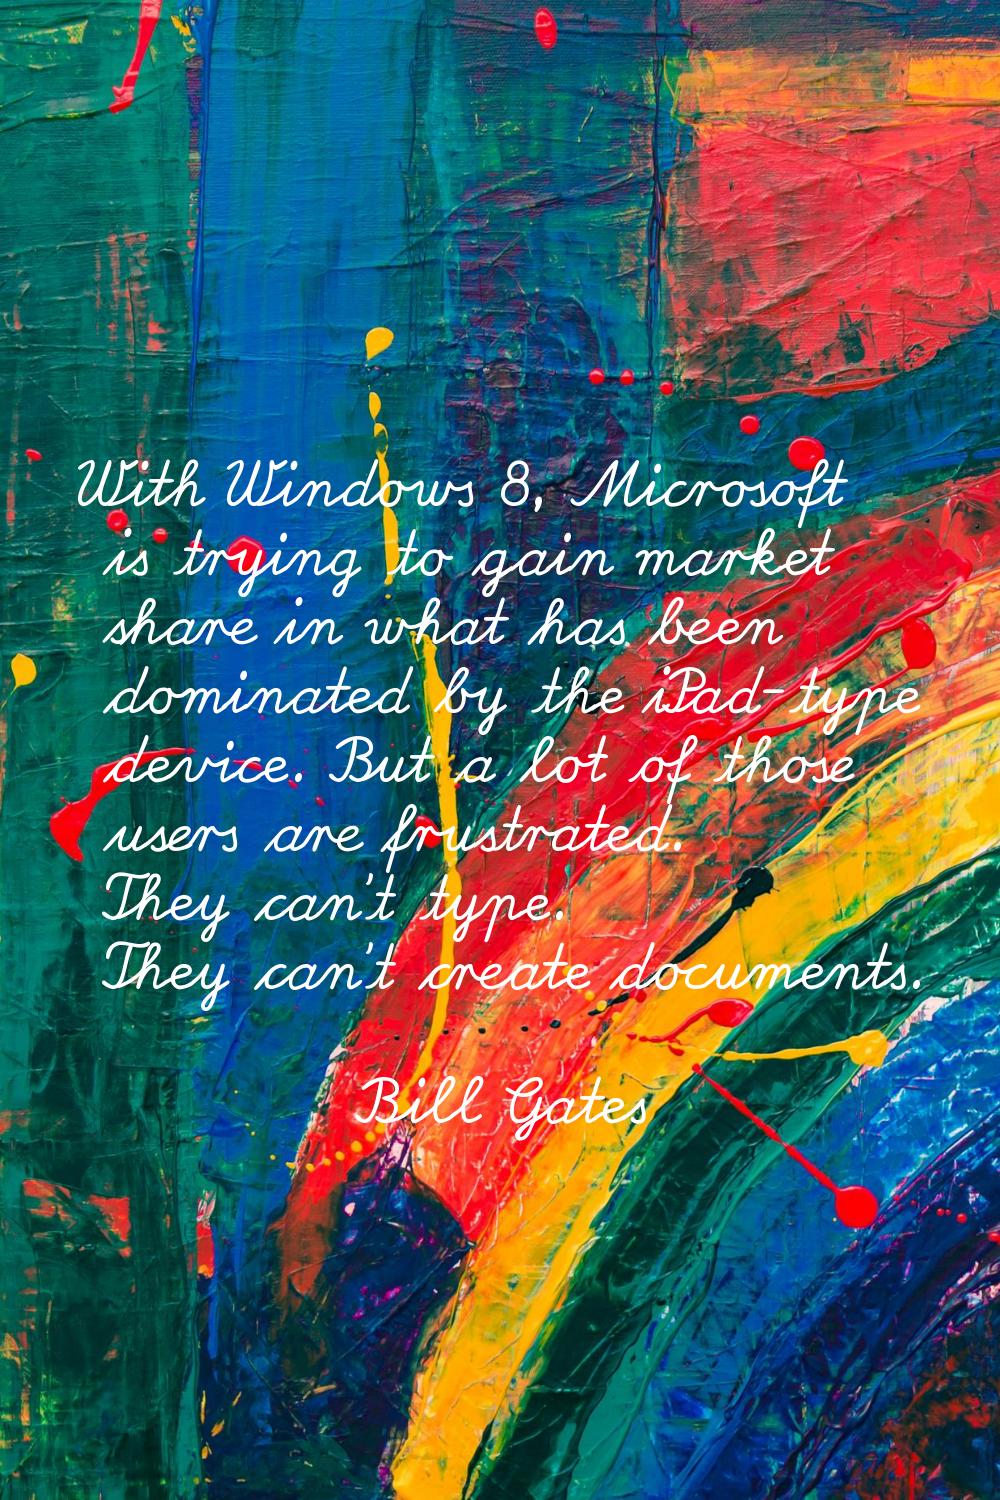 With Windows 8, Microsoft is trying to gain market share in what has been dominated by the iPad-typ